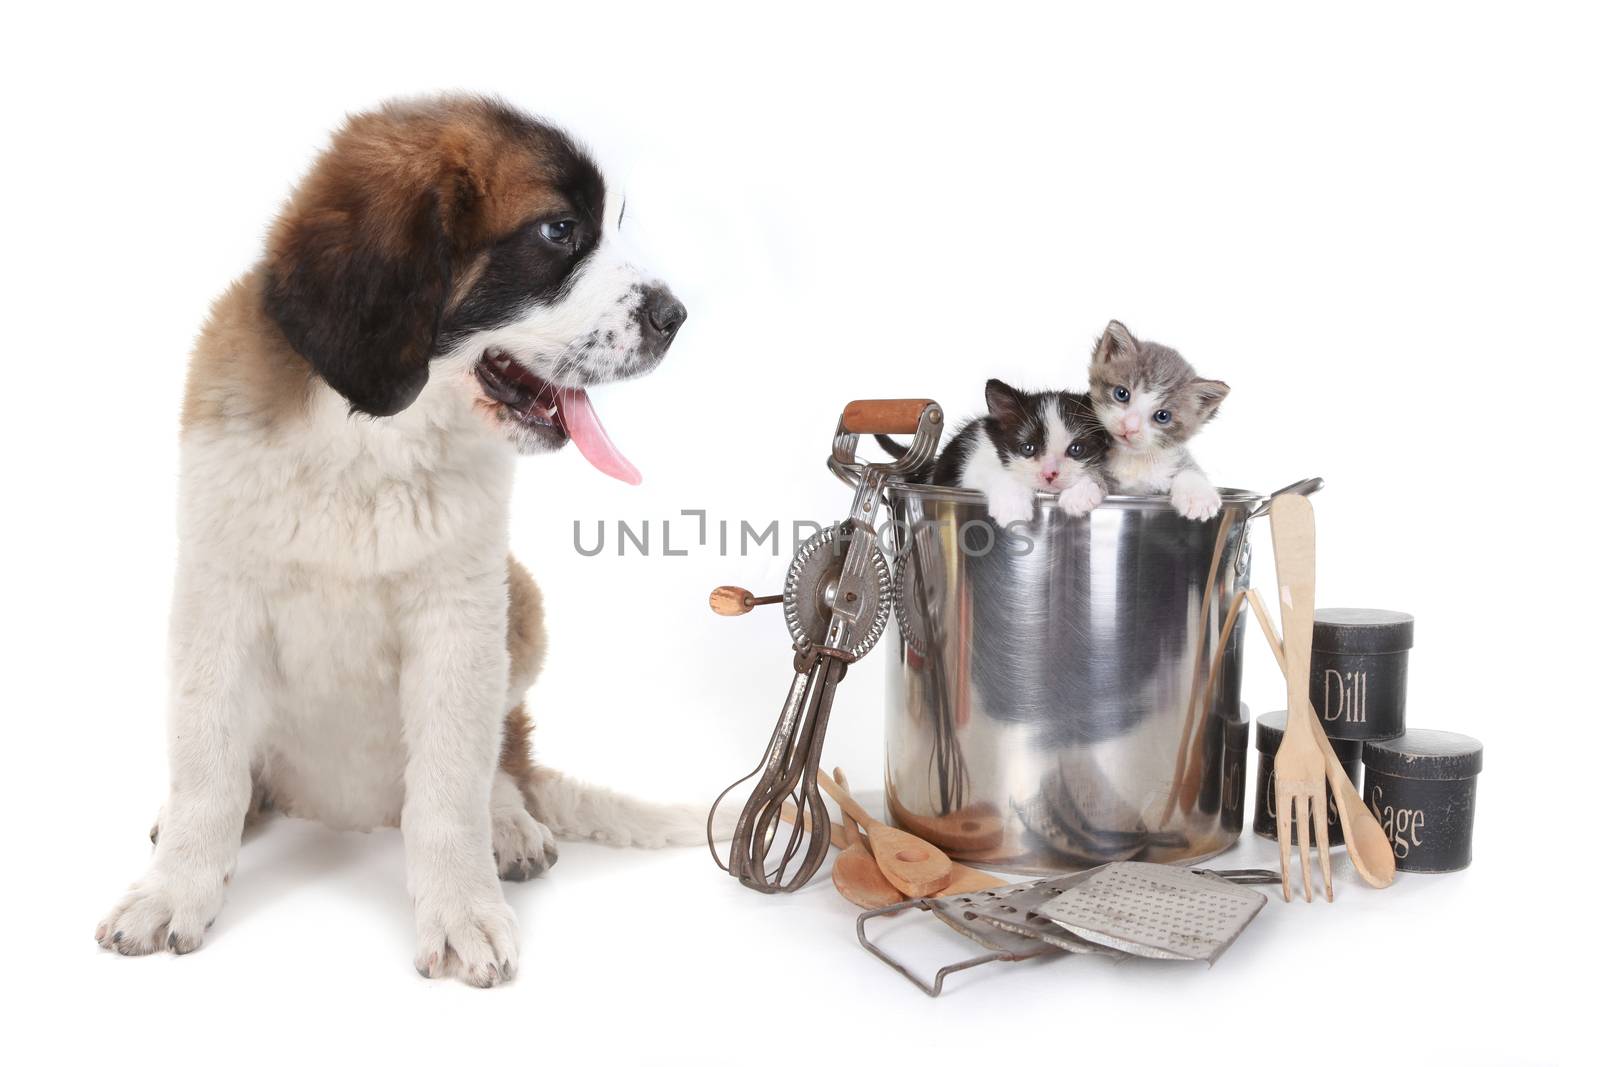  Funny Image of Saint Bernard Watching Kittens in a Cooking Pot